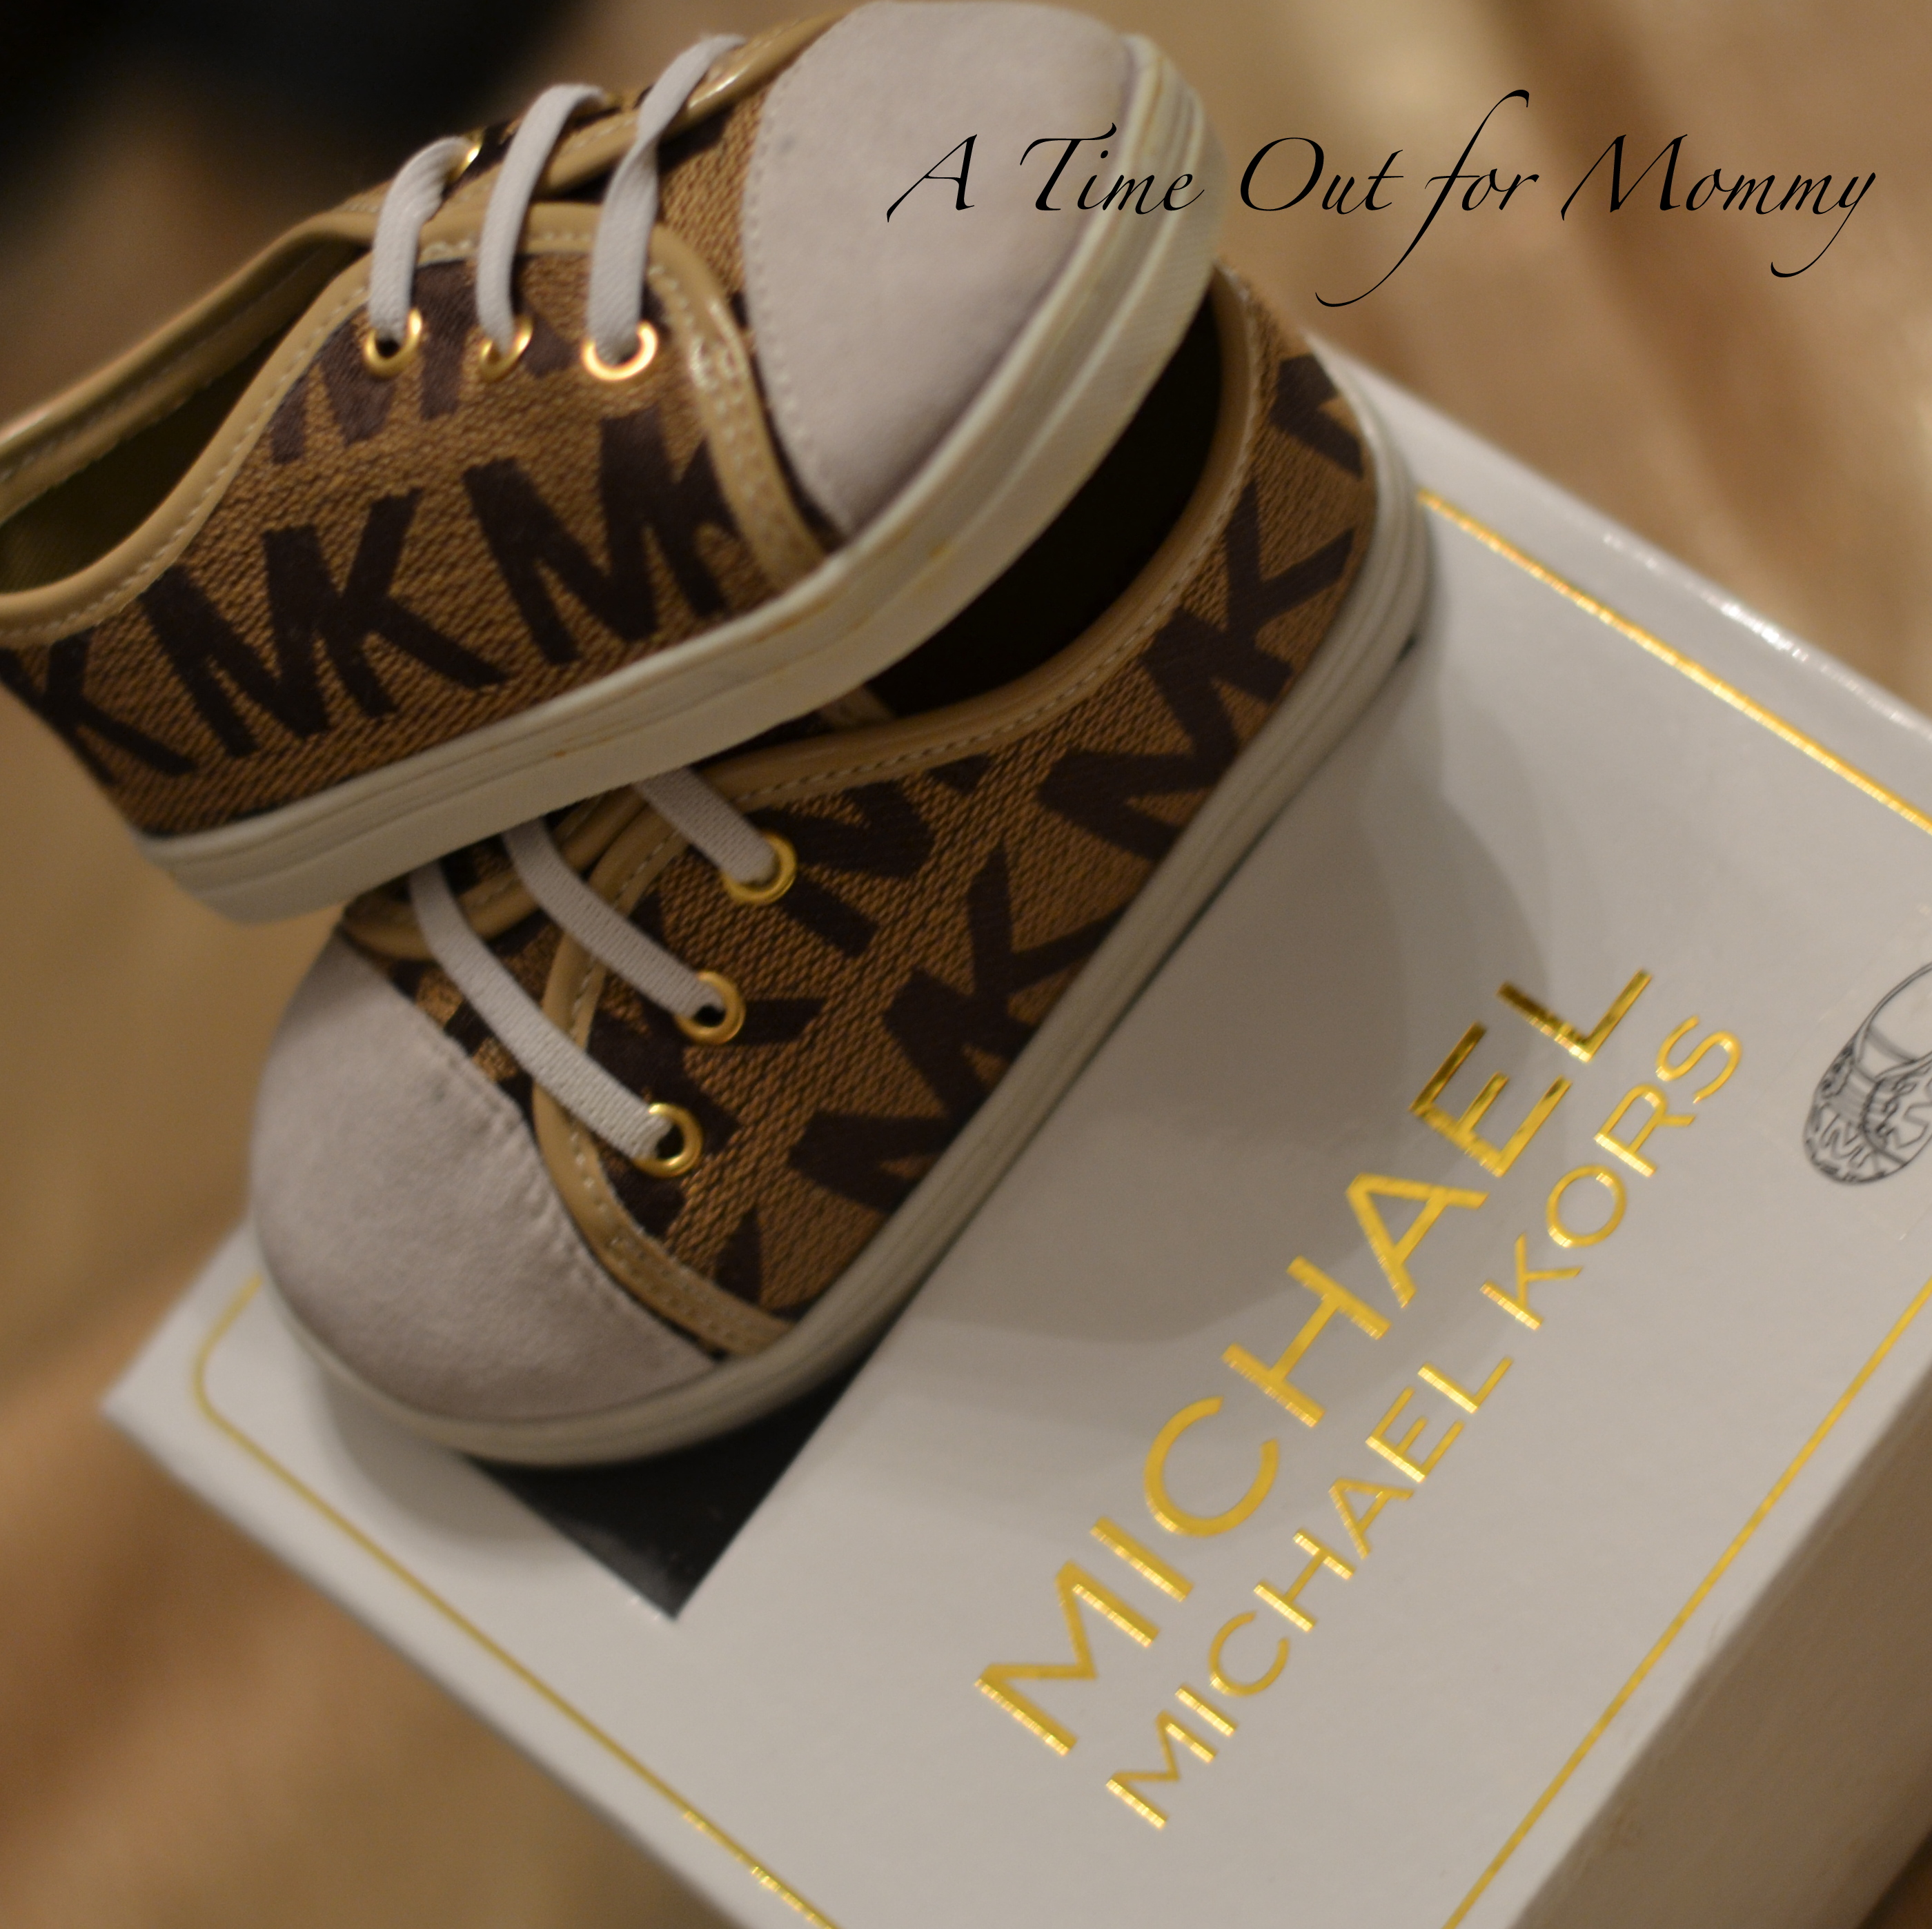 brug koloni Withered Michael Kors Baby Ivy Sneak! - A Time Out for Mommy